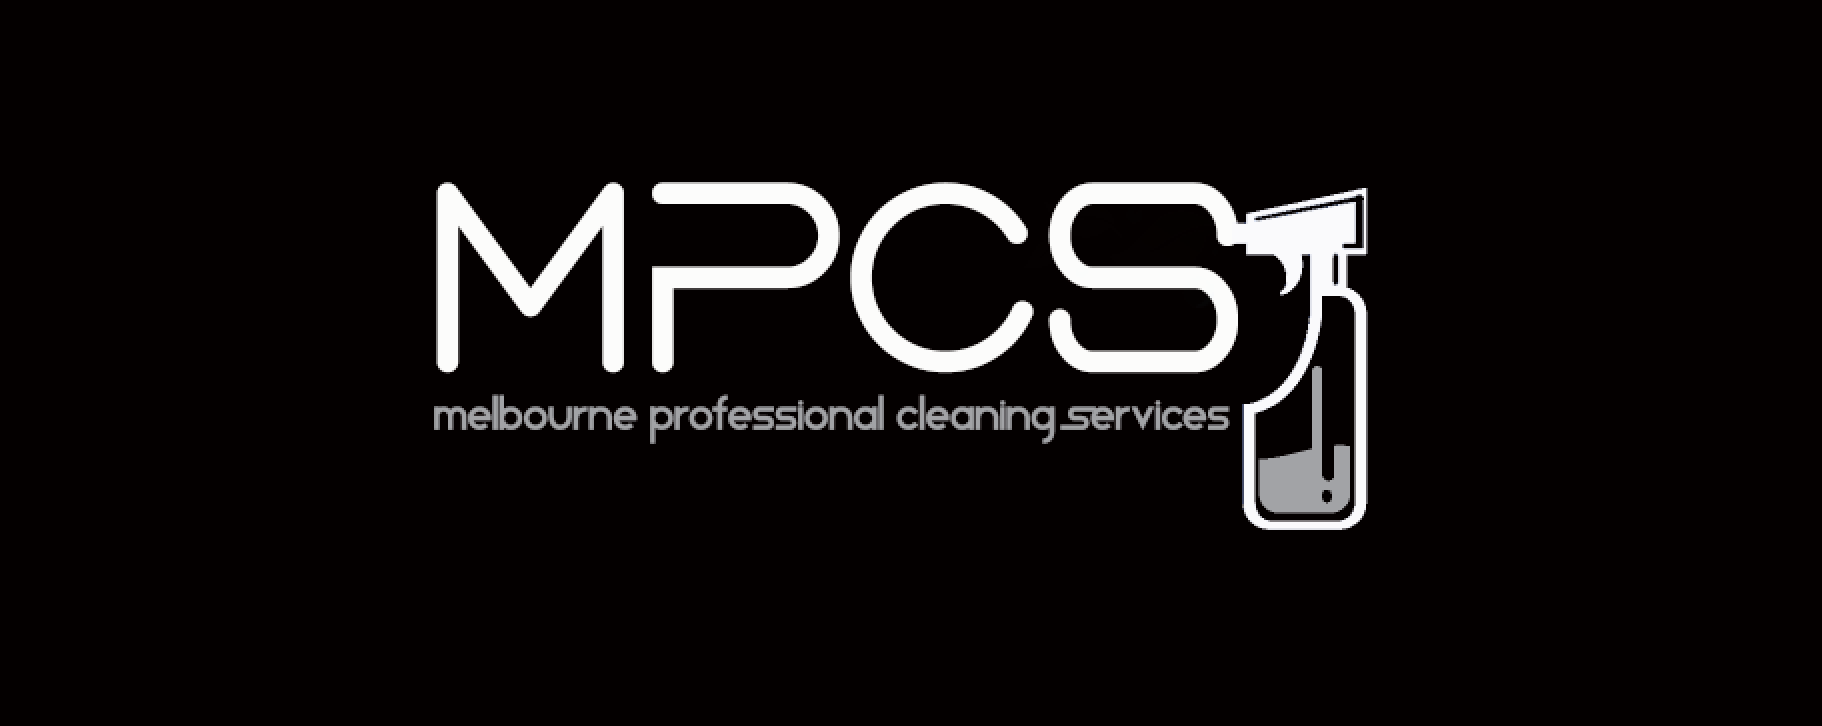 Melbourne Professional Cleaning Services Logo.png